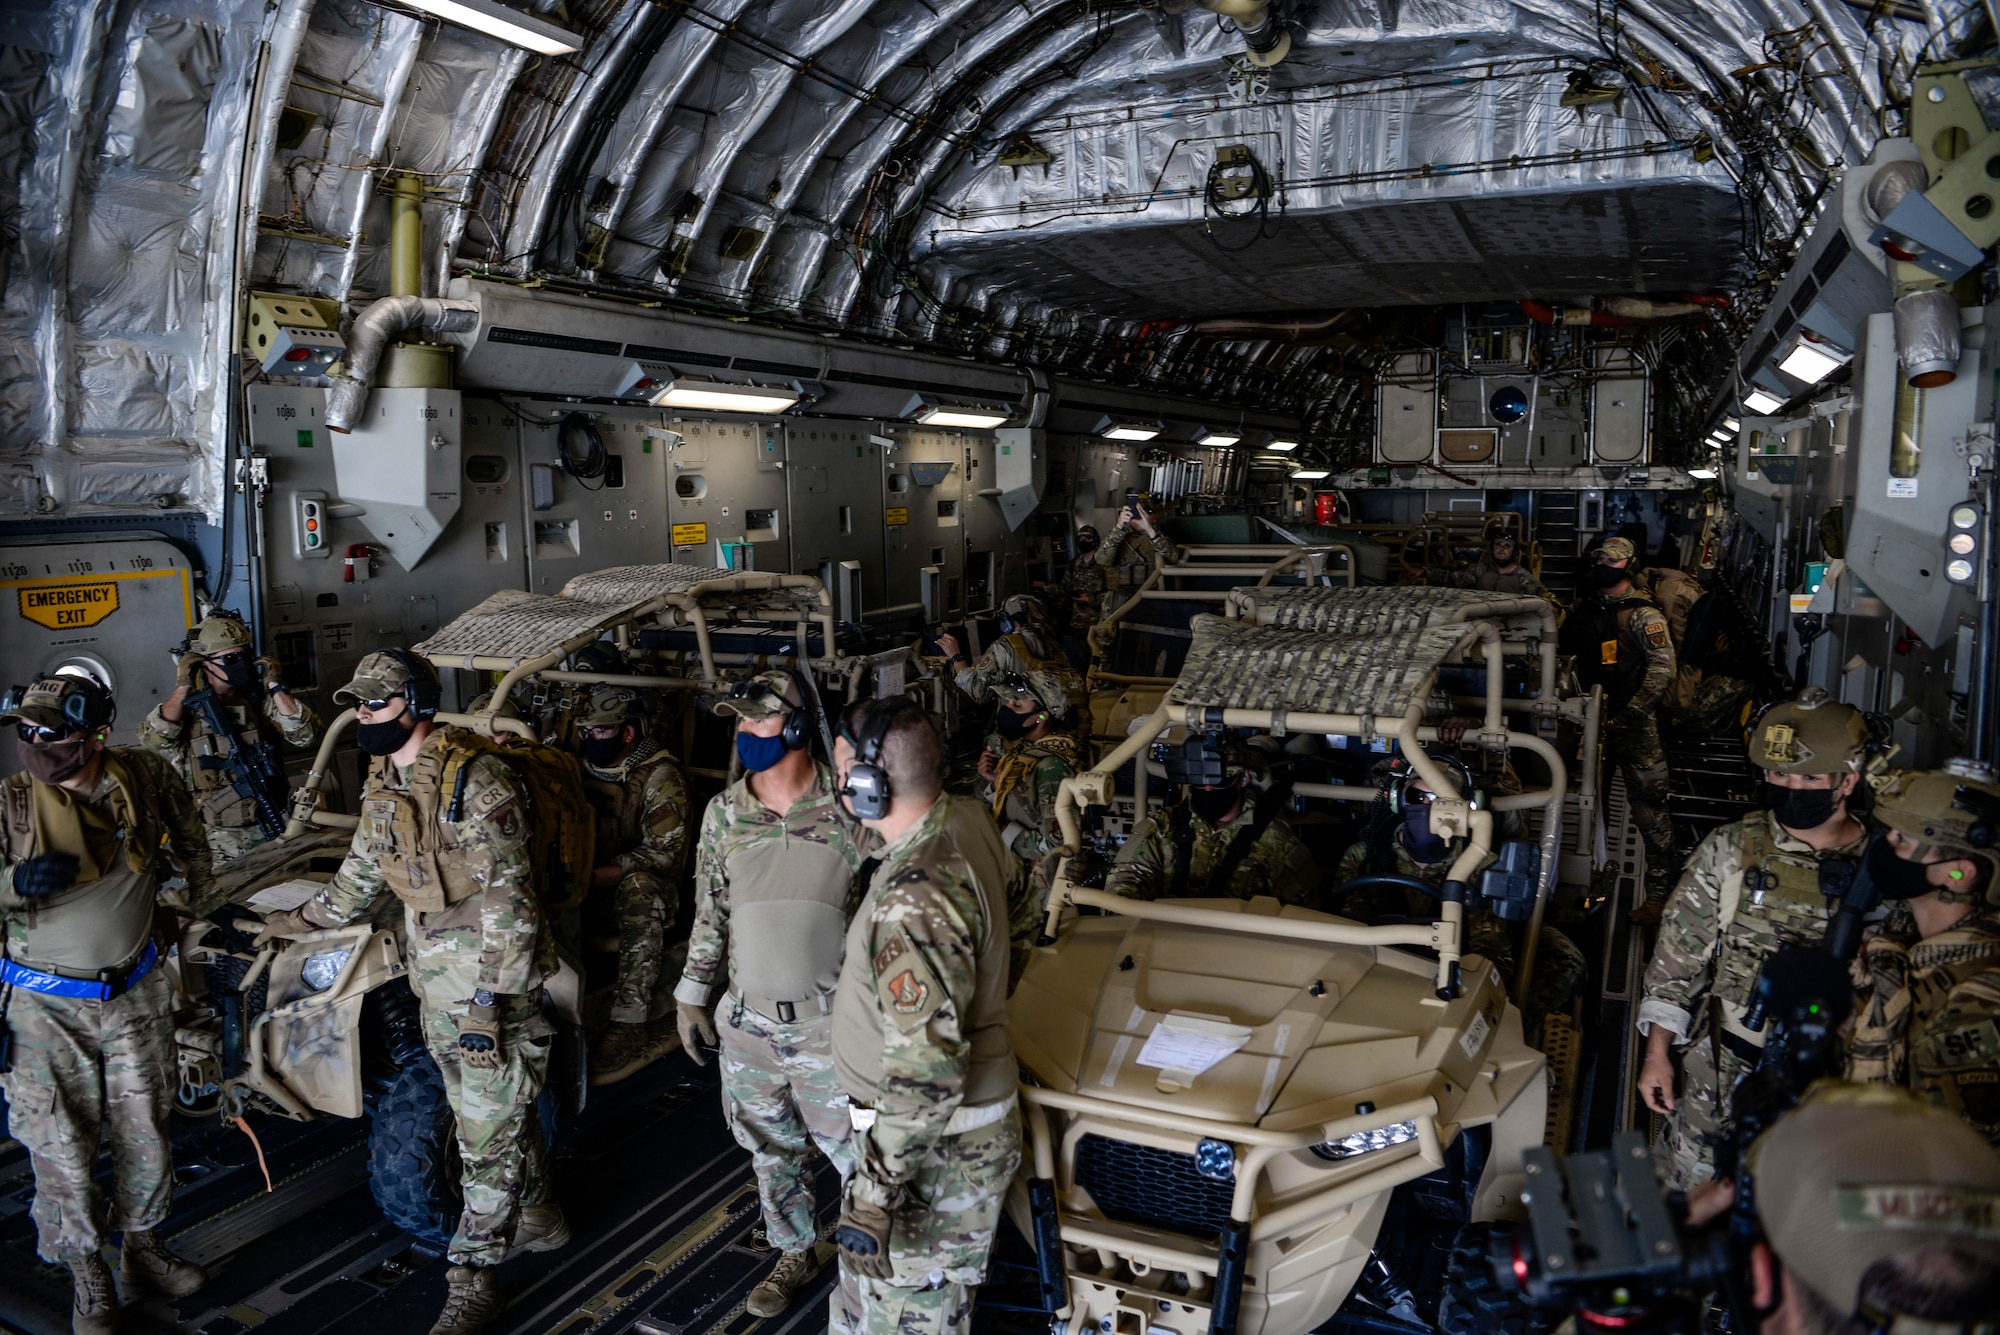 U.S. Air Force Airmen assigned to the 36th Contingency Response Group, prepare to off load a C-17 Globemaster III assigned to the 8th Airlift Squadron, McChord Air Force Base, Wash. during a field training exercise on Wake Island, Western Pacific, April 2, 2021.